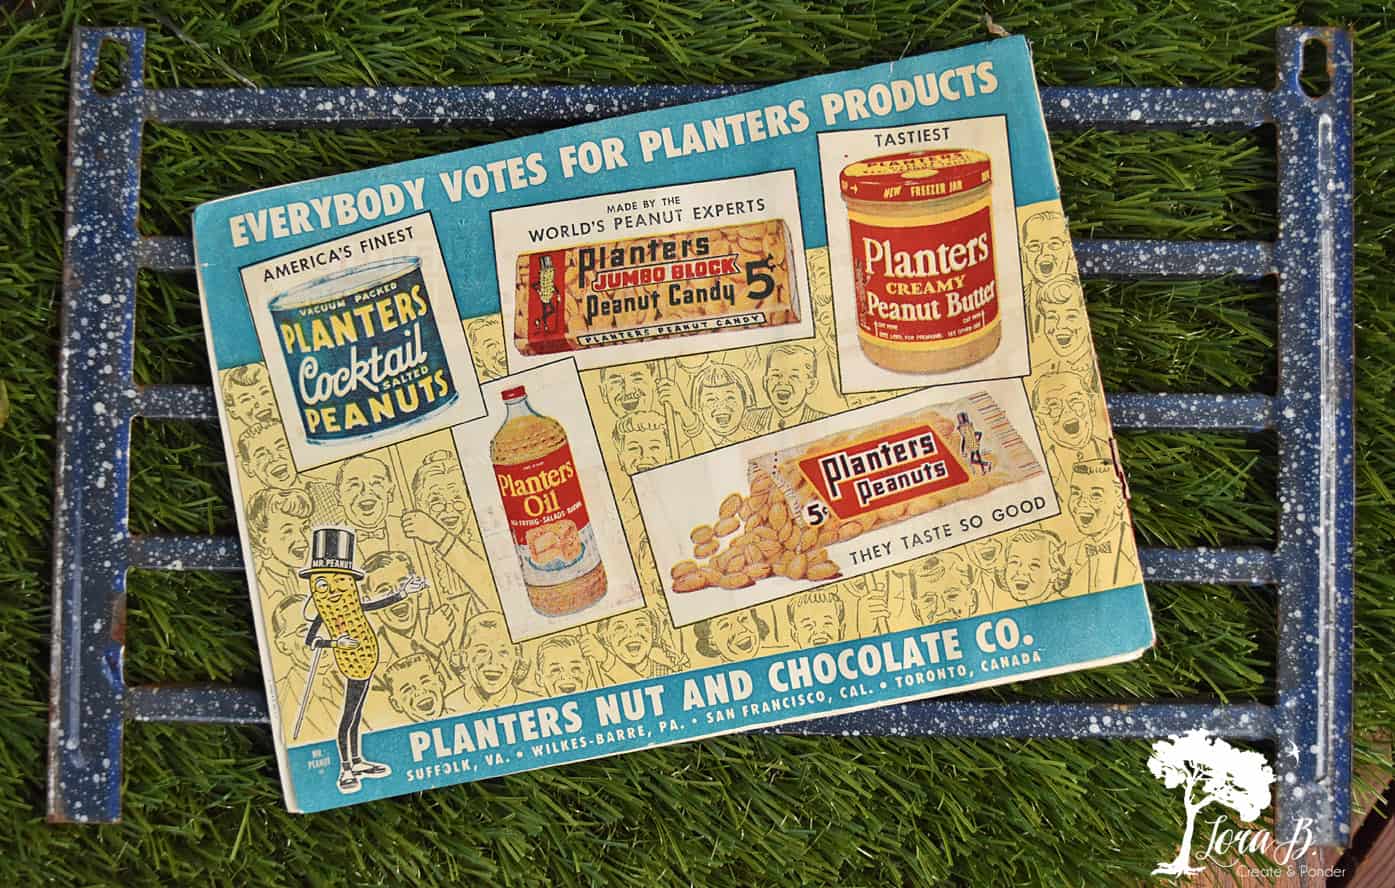 Planter's nuts advertisement